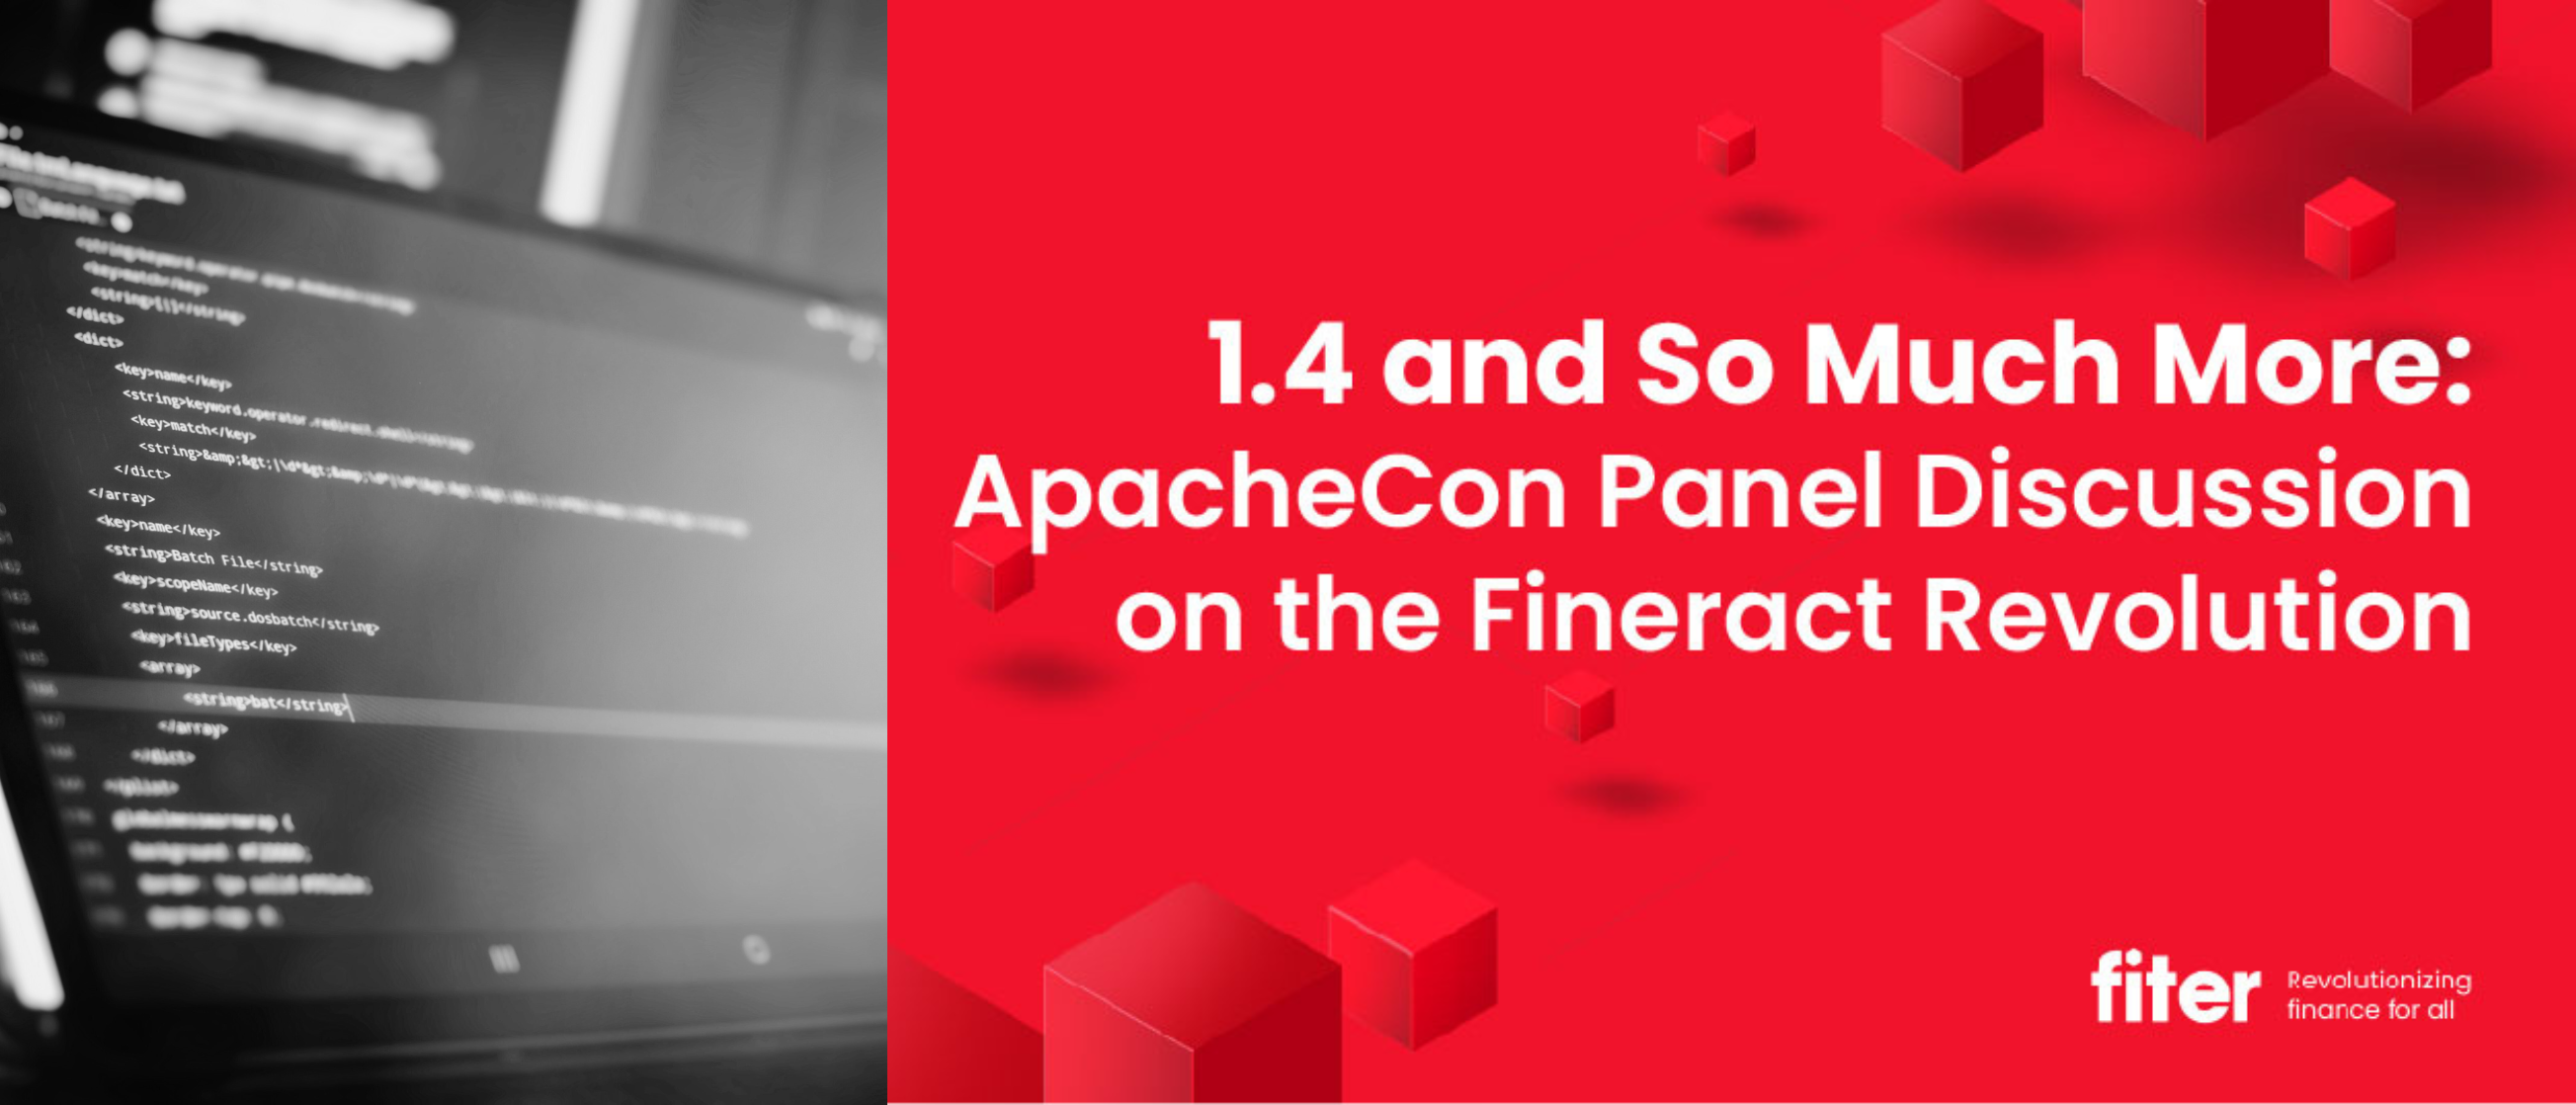 1.4 and So Much More: ApacheConPanel Discussion on the FineractRevolution